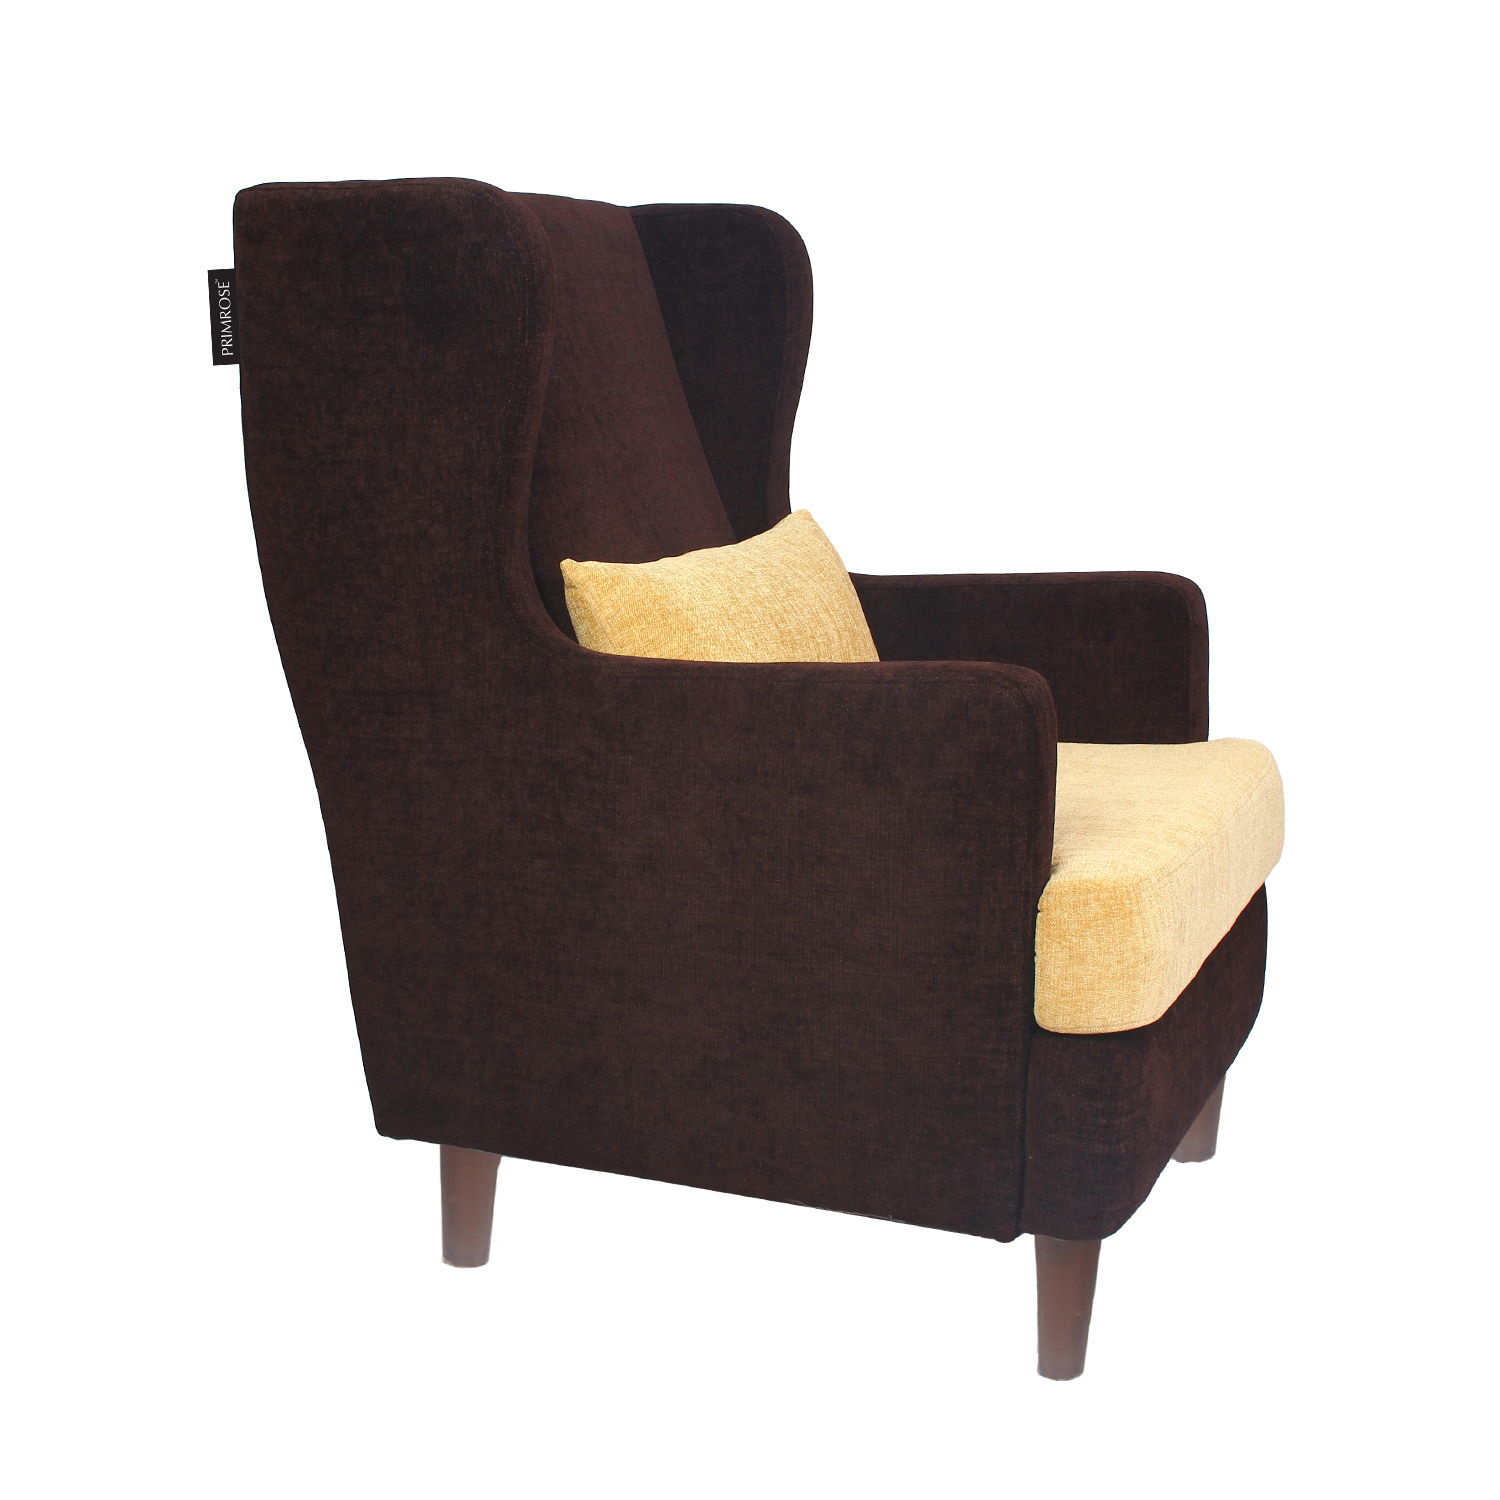 PRIMROSE Wing High Back Nevada Two Tone Fabric Chair - Brown And Cream  